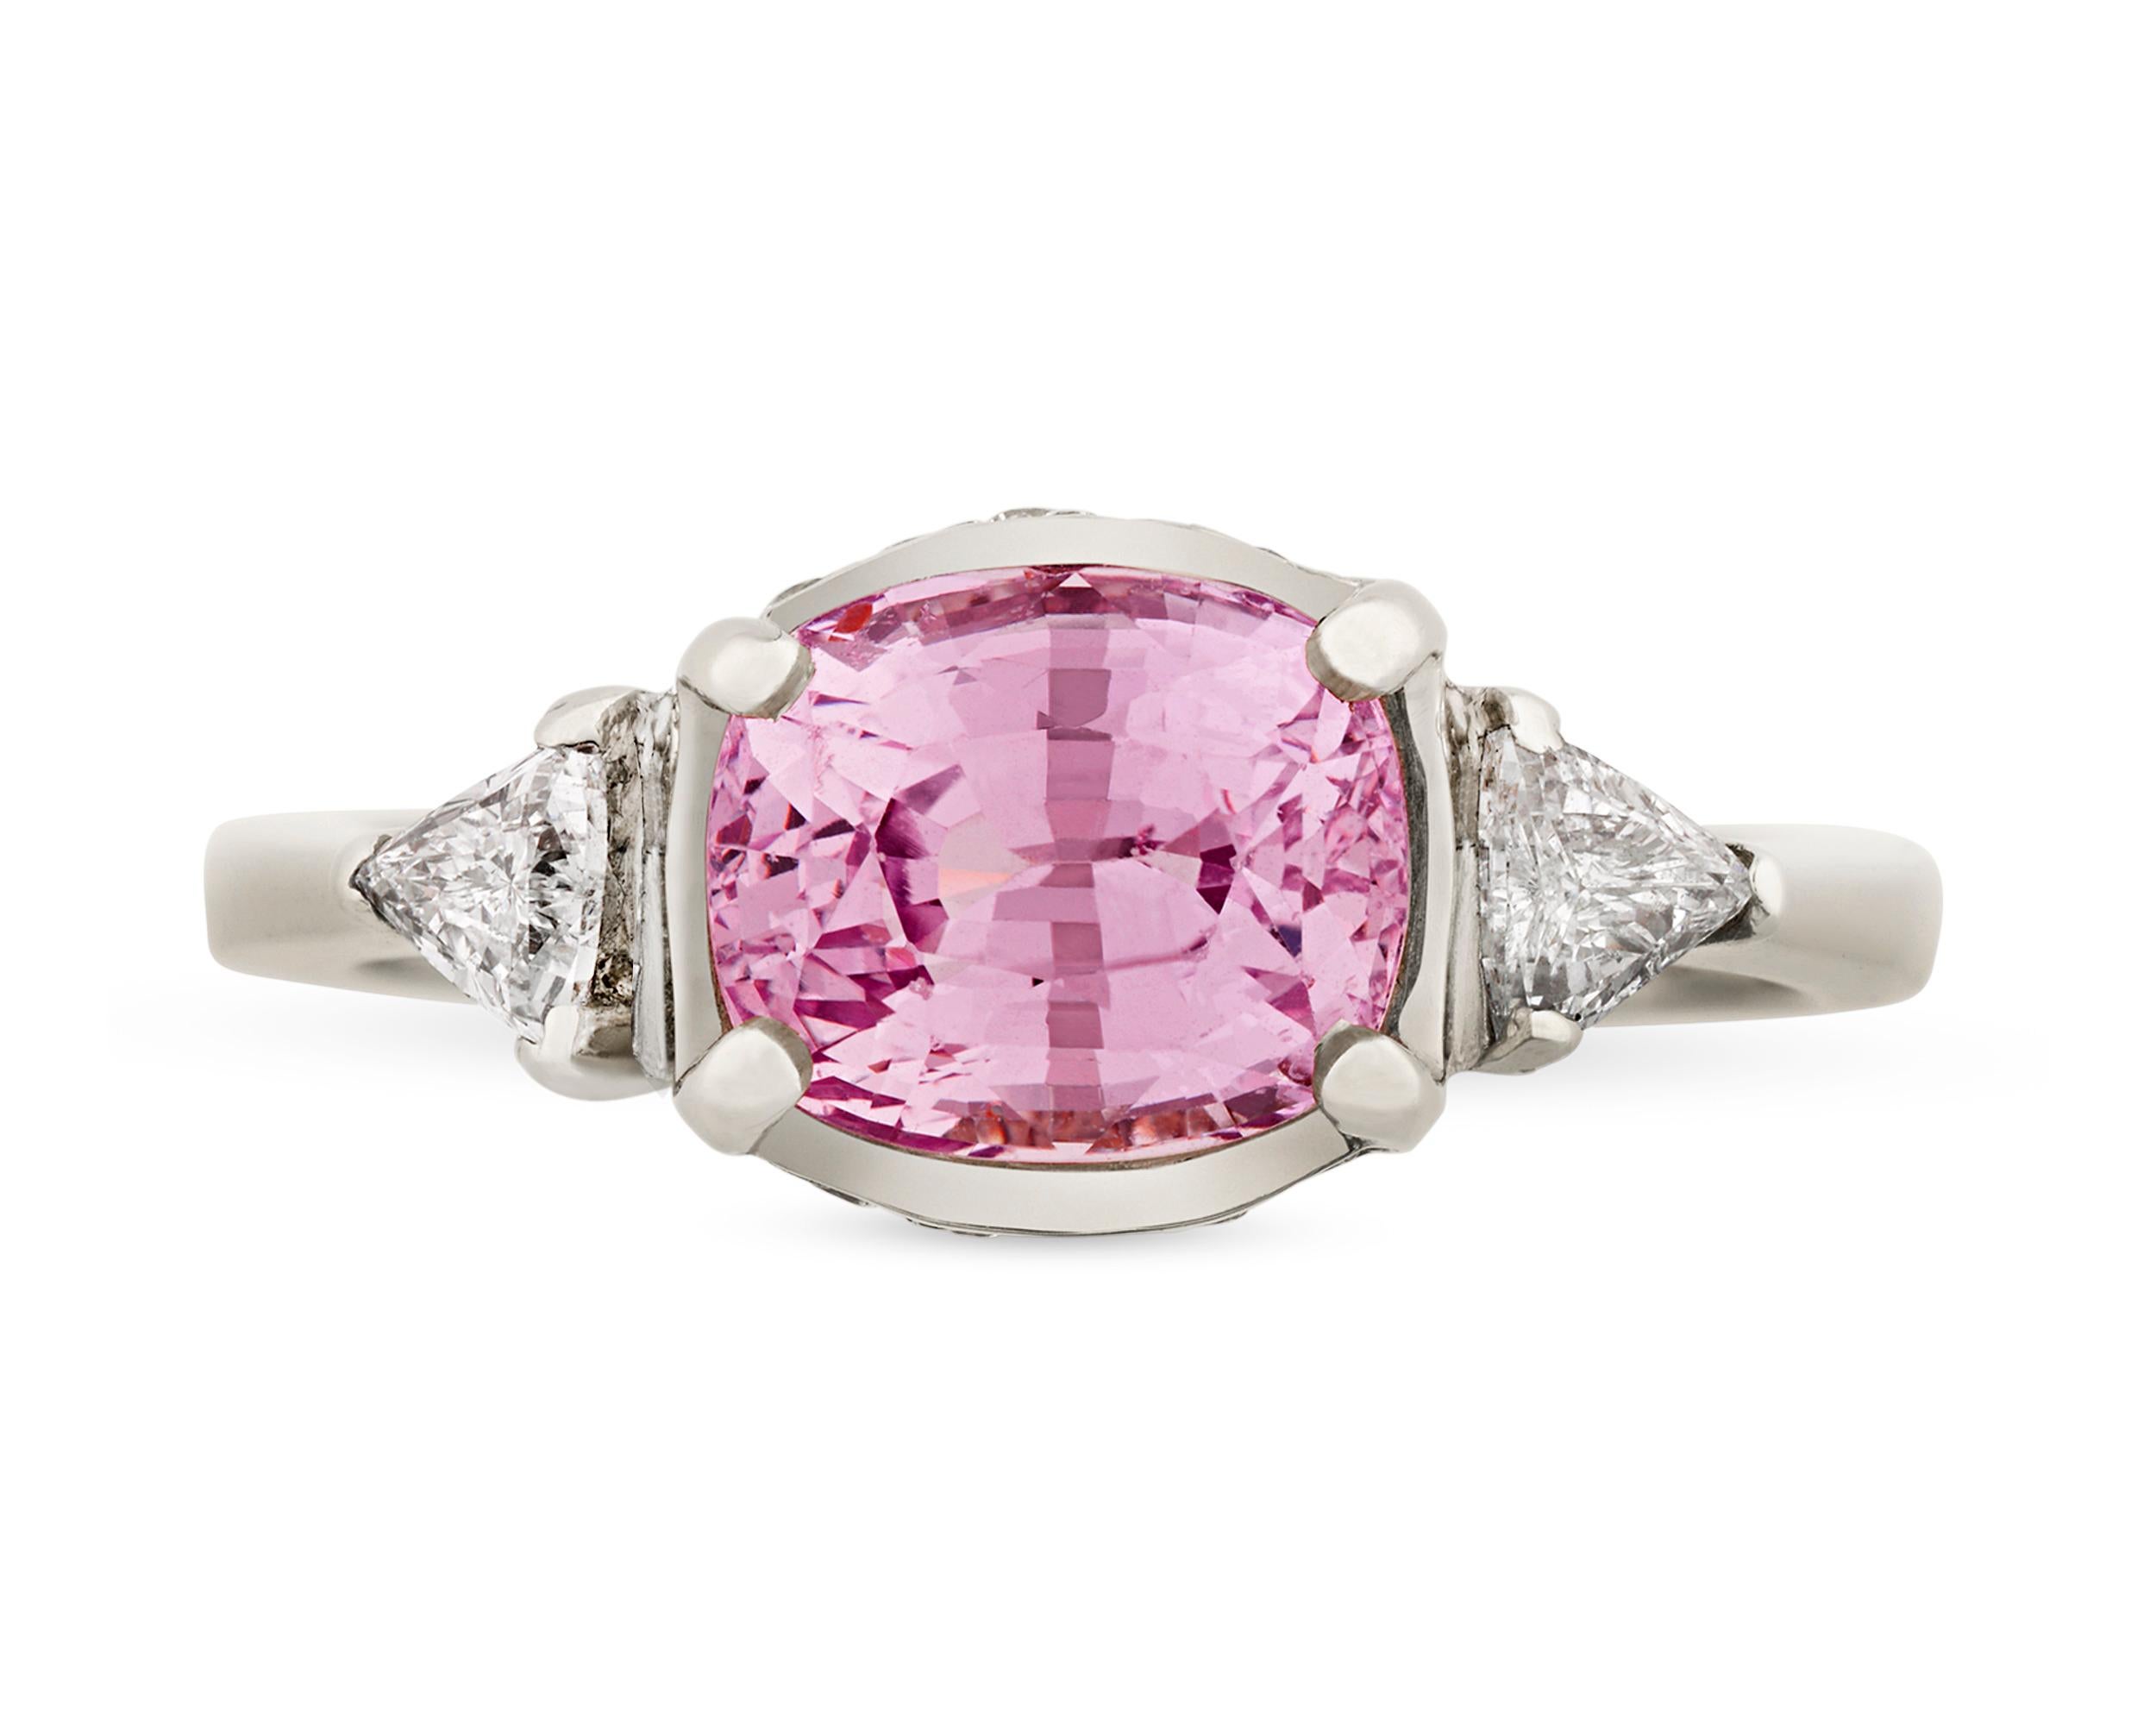 A rare cushion-cut pink sapphire is the star of this ring. Pink is among the most coveted hues in which to find this colorful gem, and the distinctive, rosy tone of this 3.21-carat stone is truly remarkable. Accented by 0.70 total carat of white